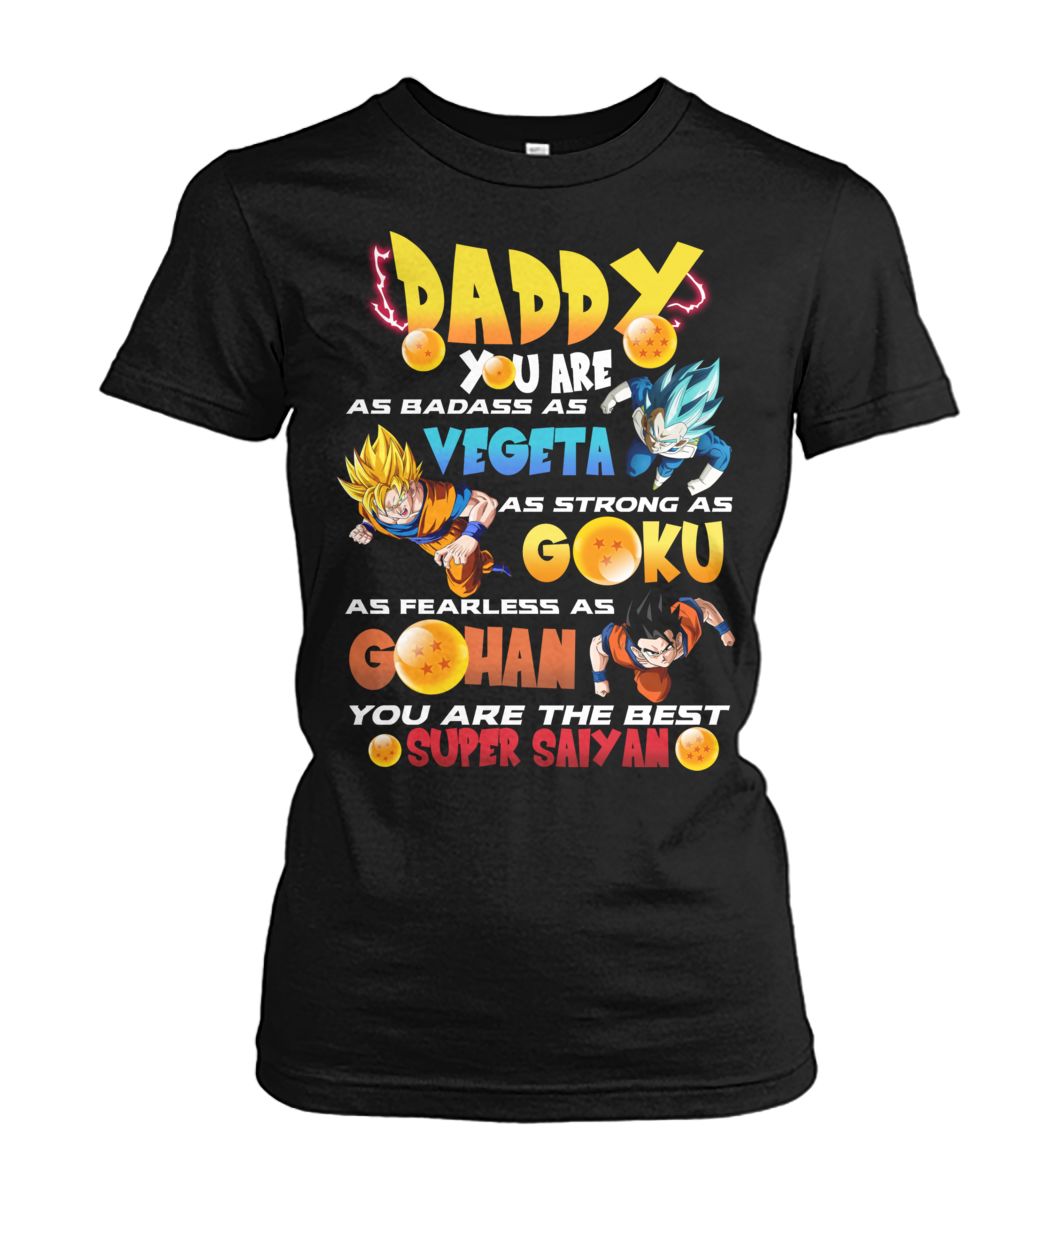 Daddy you are as badass as vegeta as strong as goku as fearless as gohan you are the best super saiyan women's crew tee